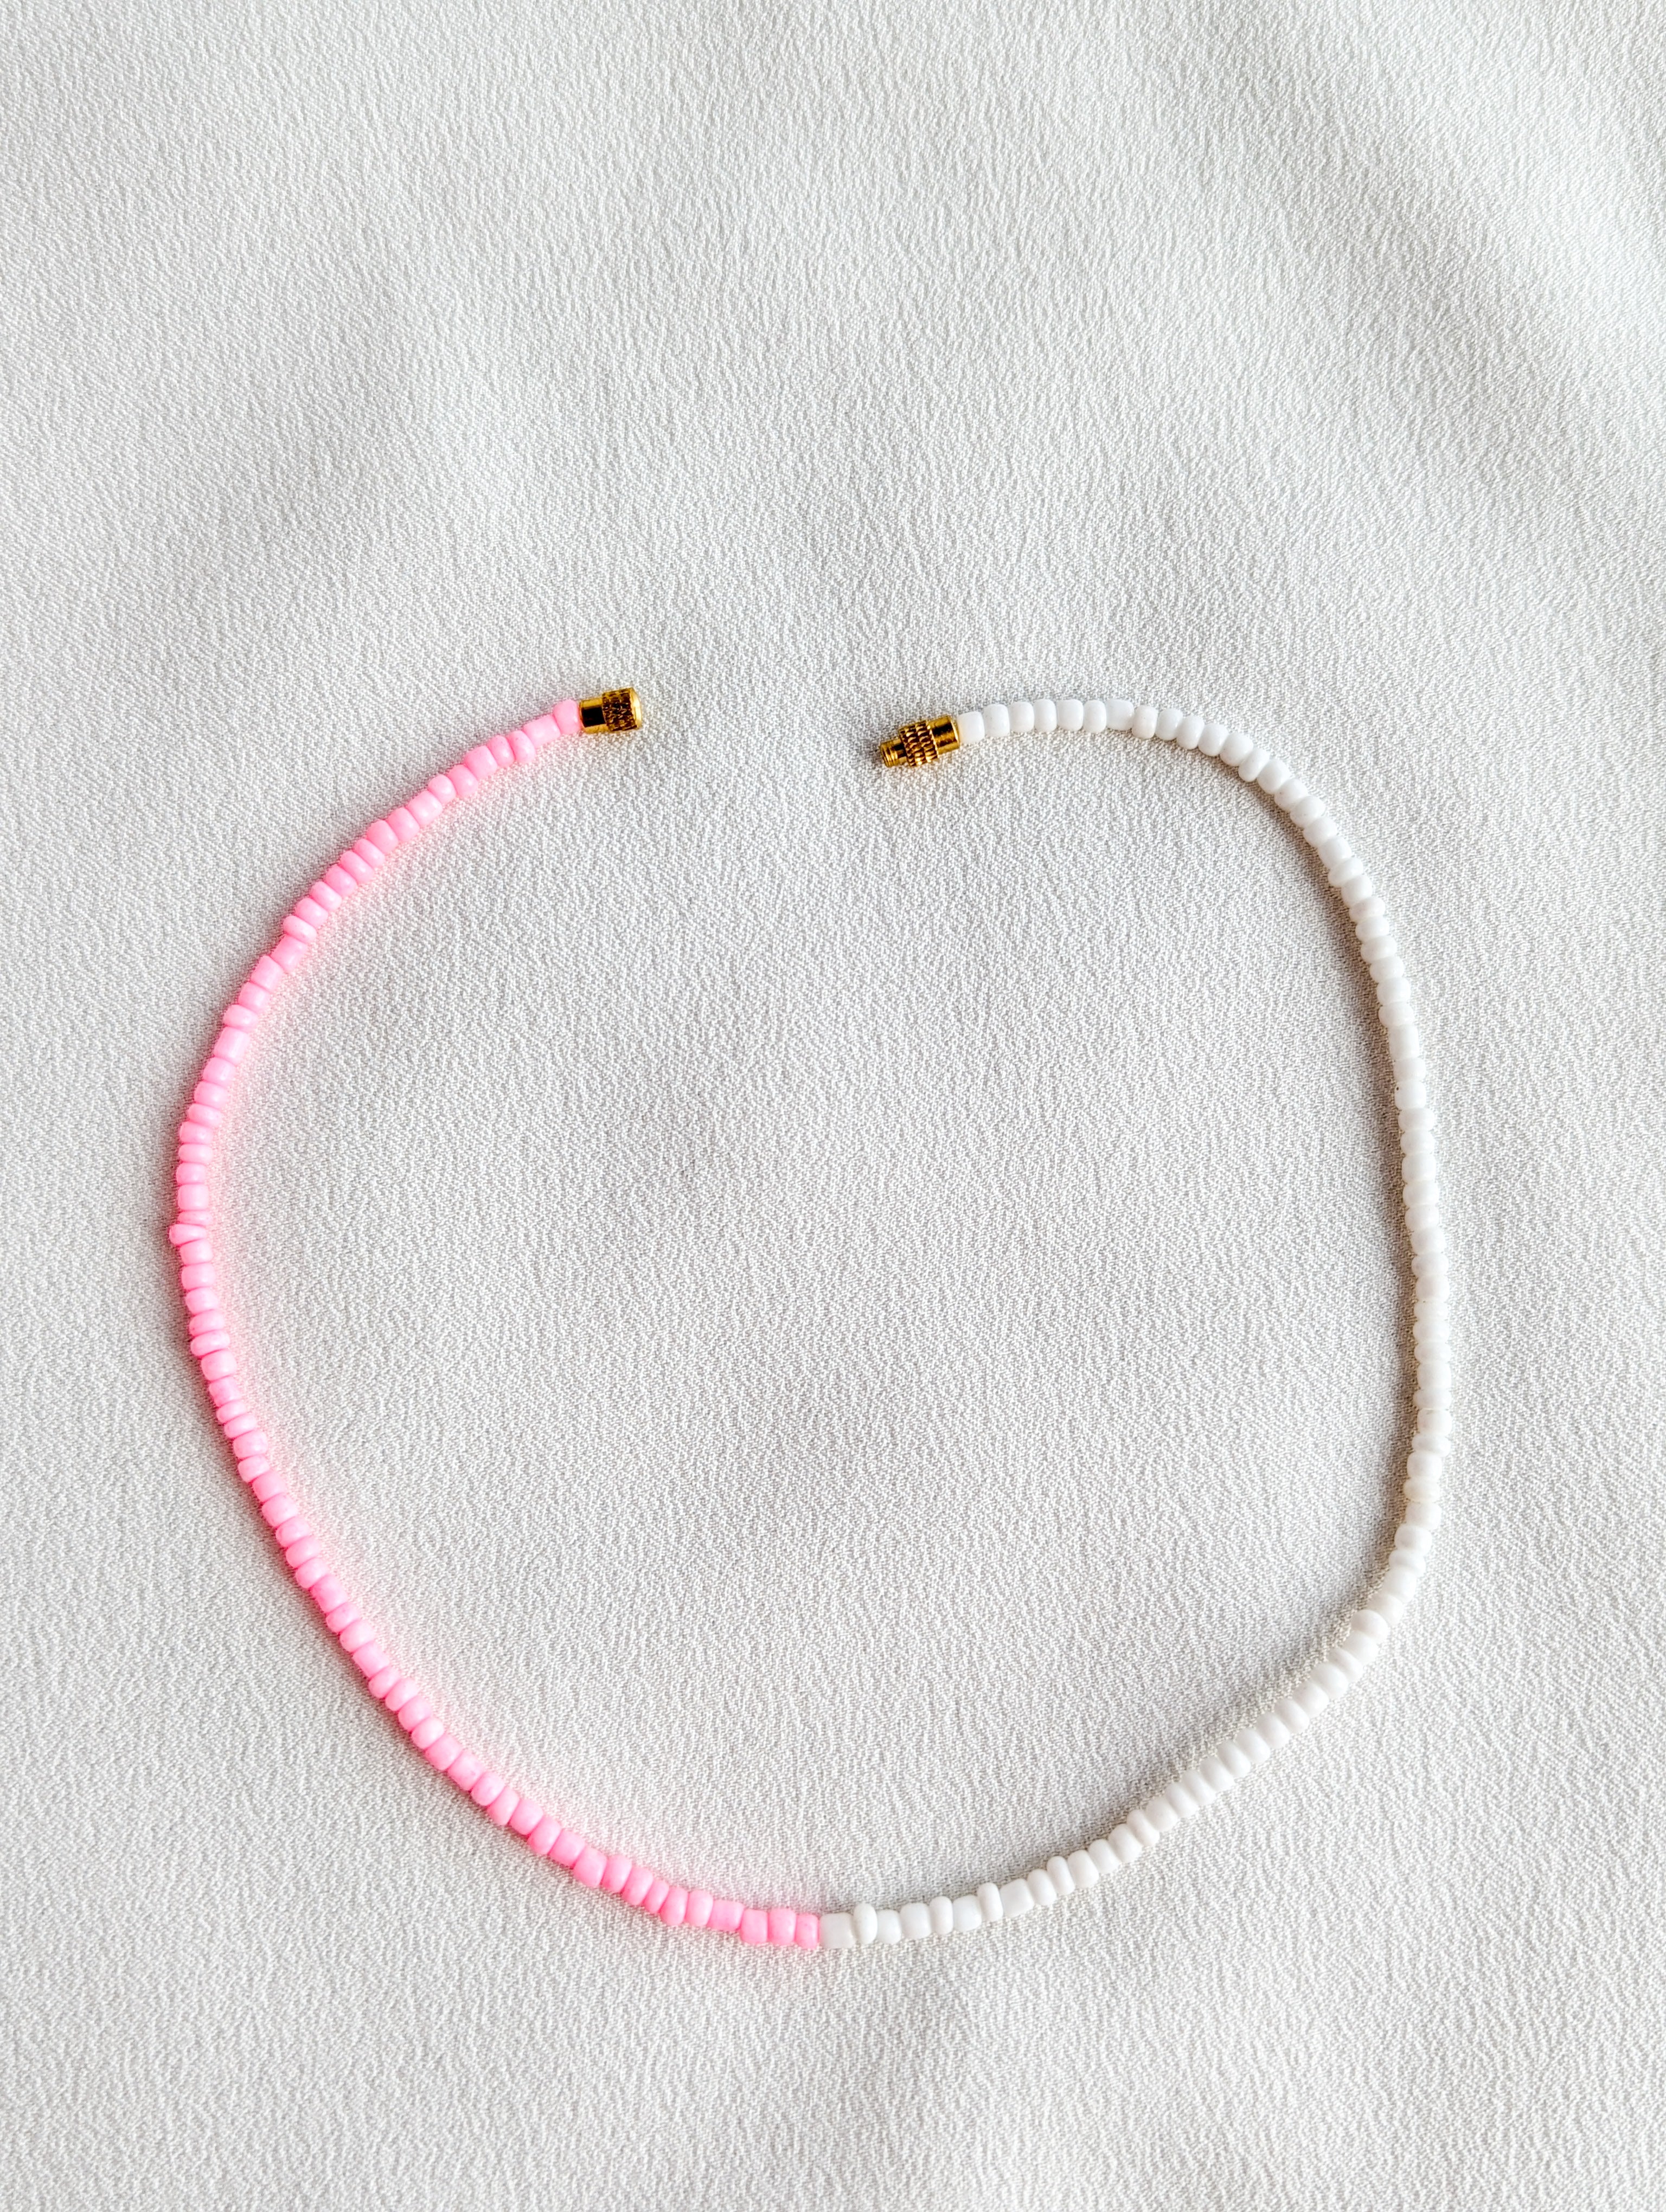 [THE FIFTY] Necklace: Pink/White [Small Beads]